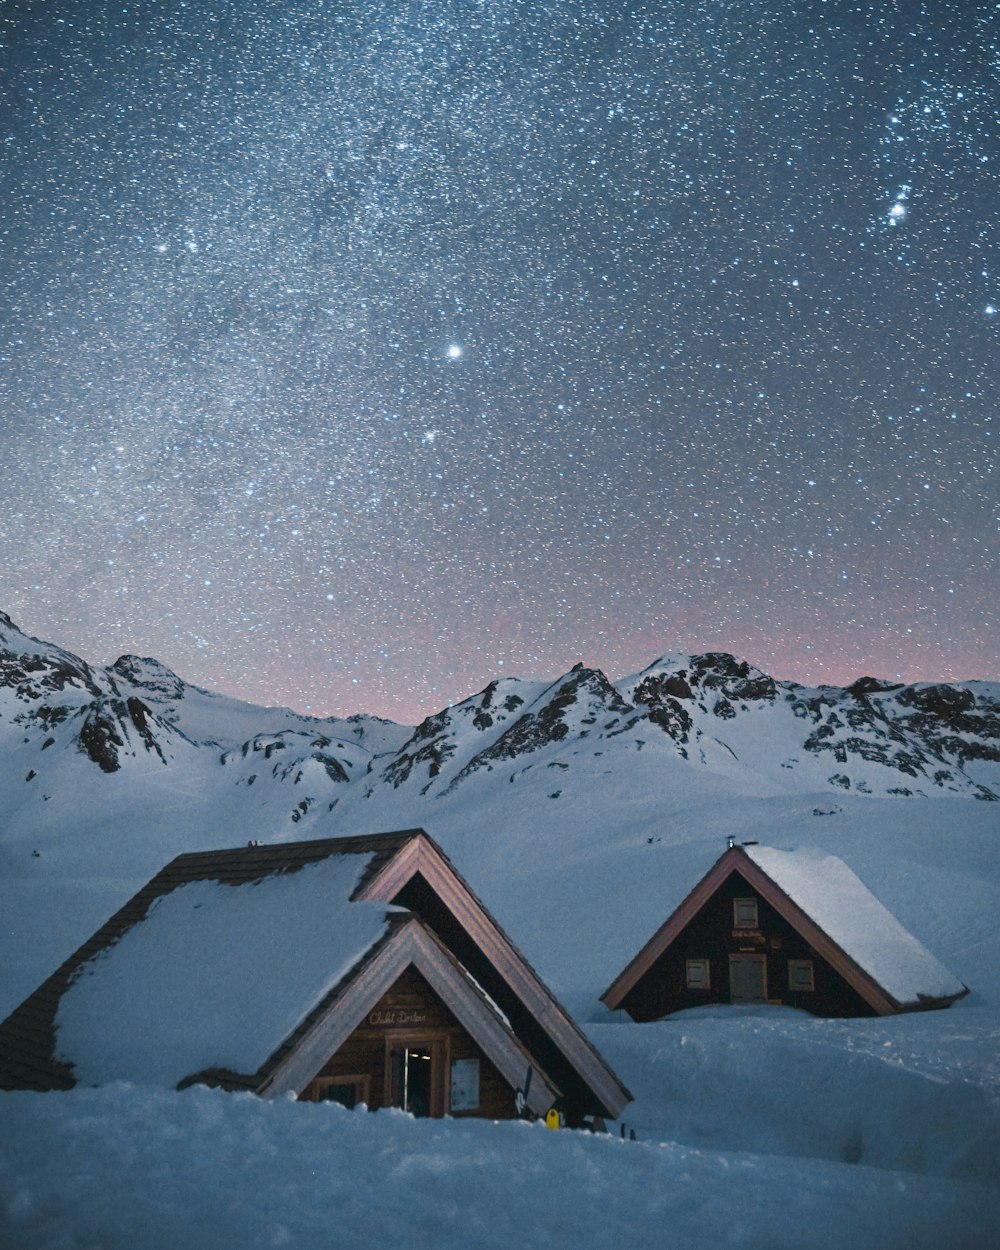 brown wooden house on snow covered ground during night time